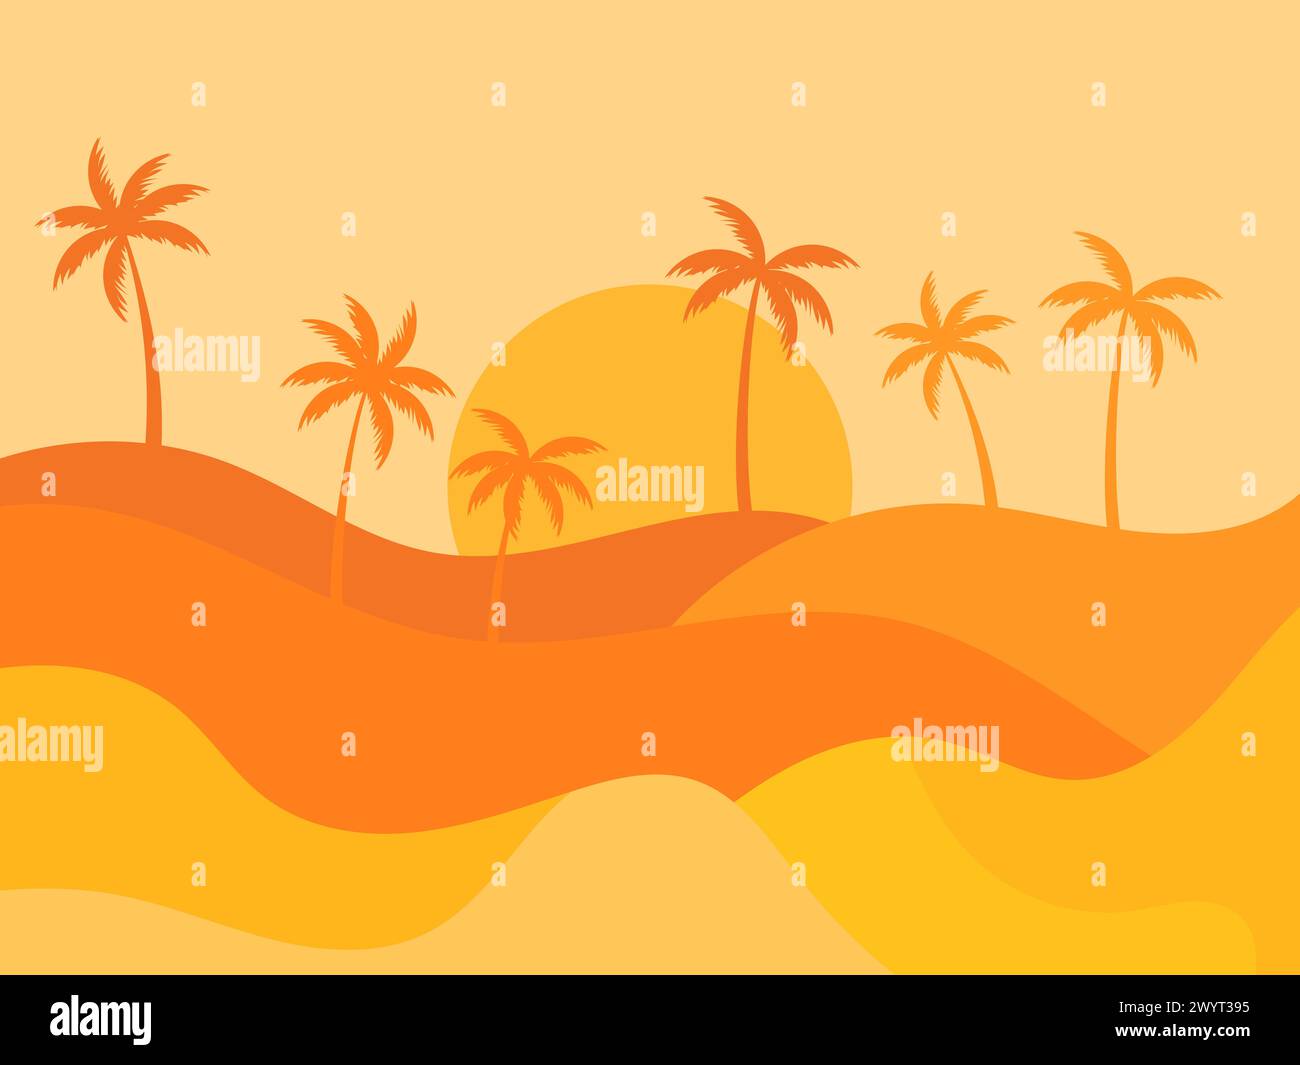 Desert landscape with palm trees and sand dunes. Silhouettes of palm trees at sunrise in the desert. Wavy landscape with sand dunes. Design for print, Stock Vector